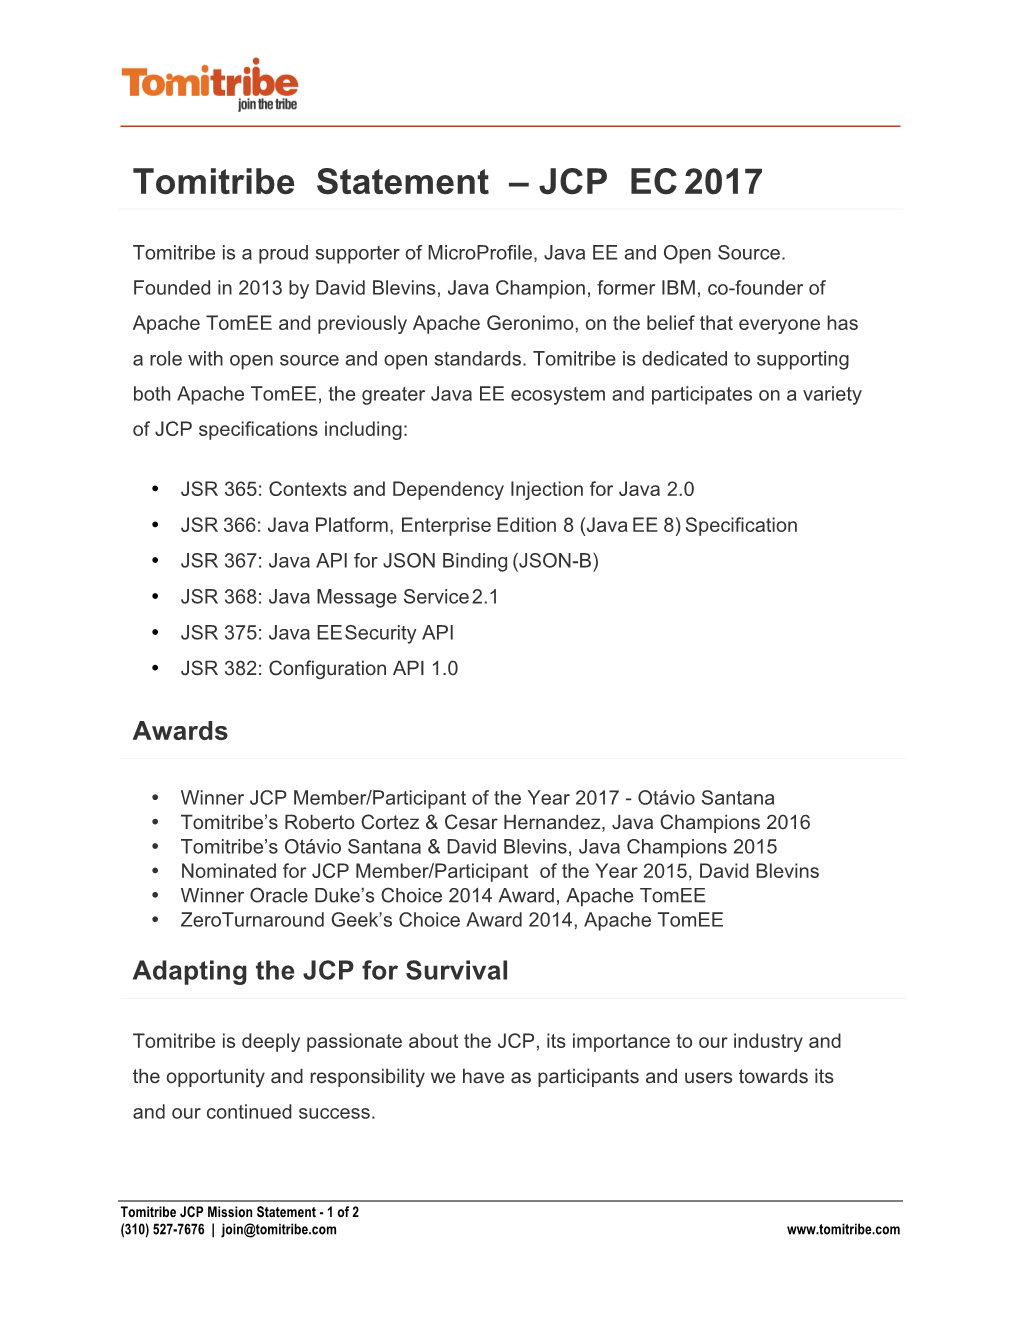 Tomitribe Position Statement